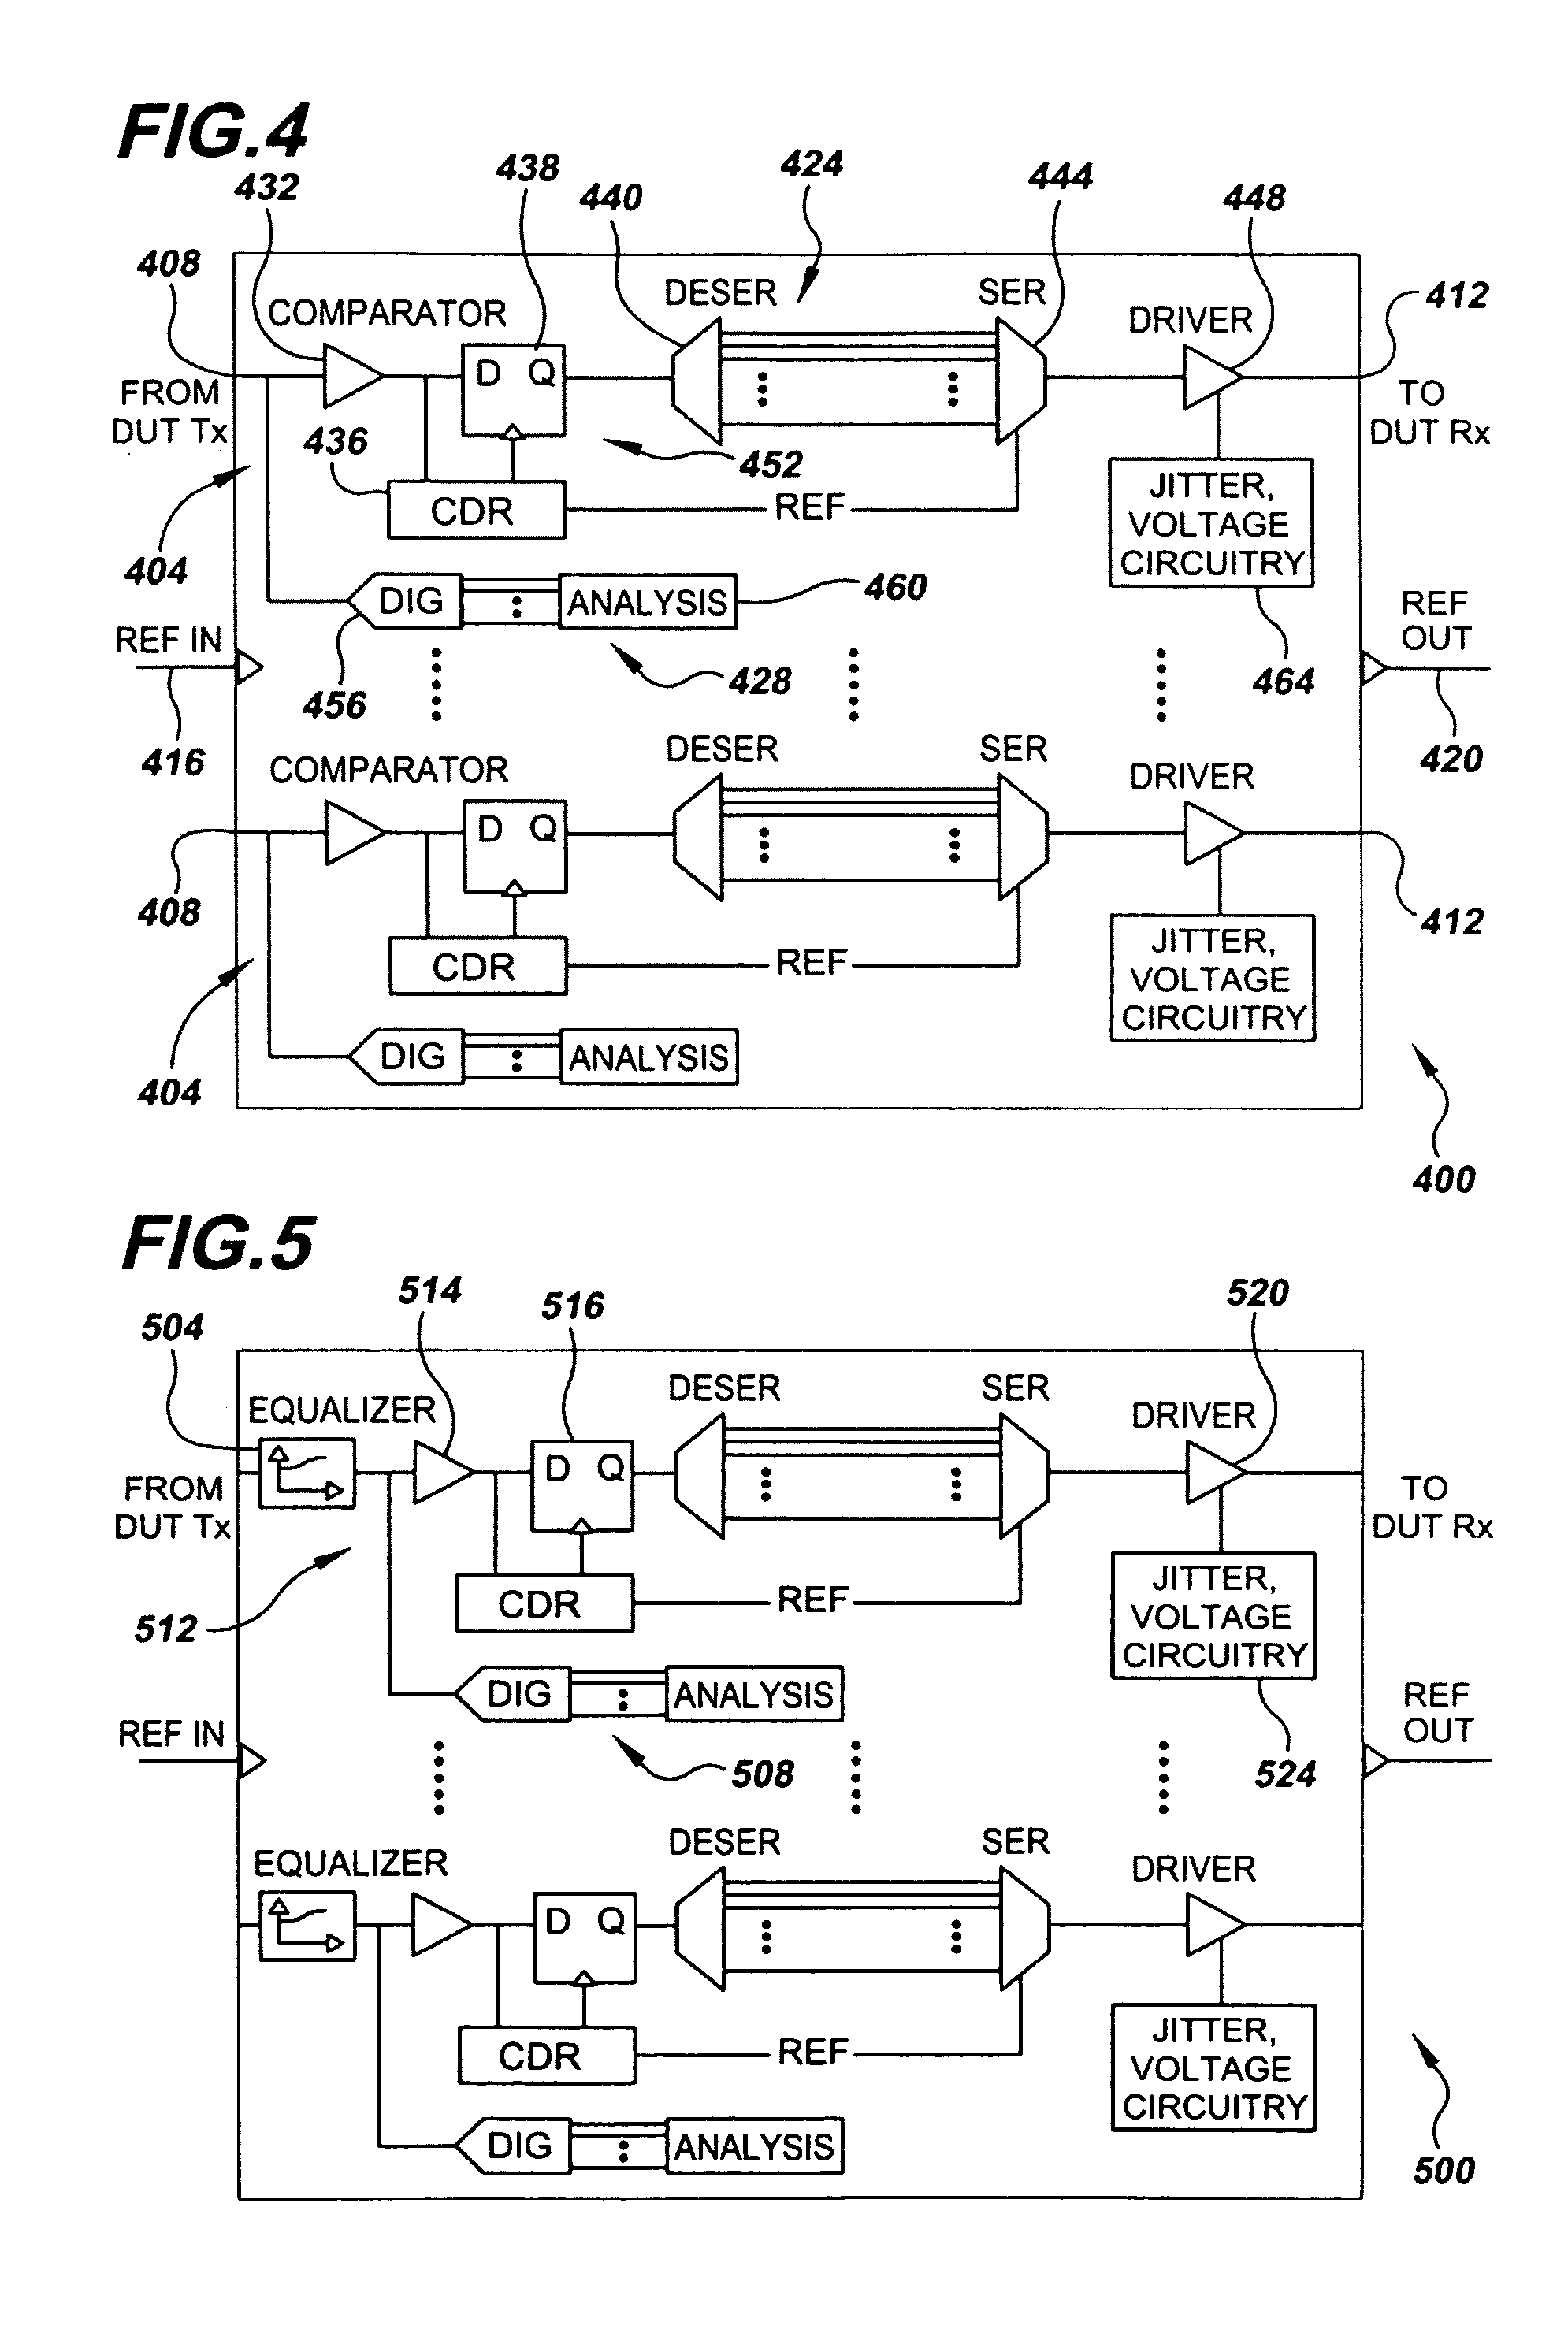 System and Method for Physical-Layer Testing of High-Speed Serial Links in their Mission Environments